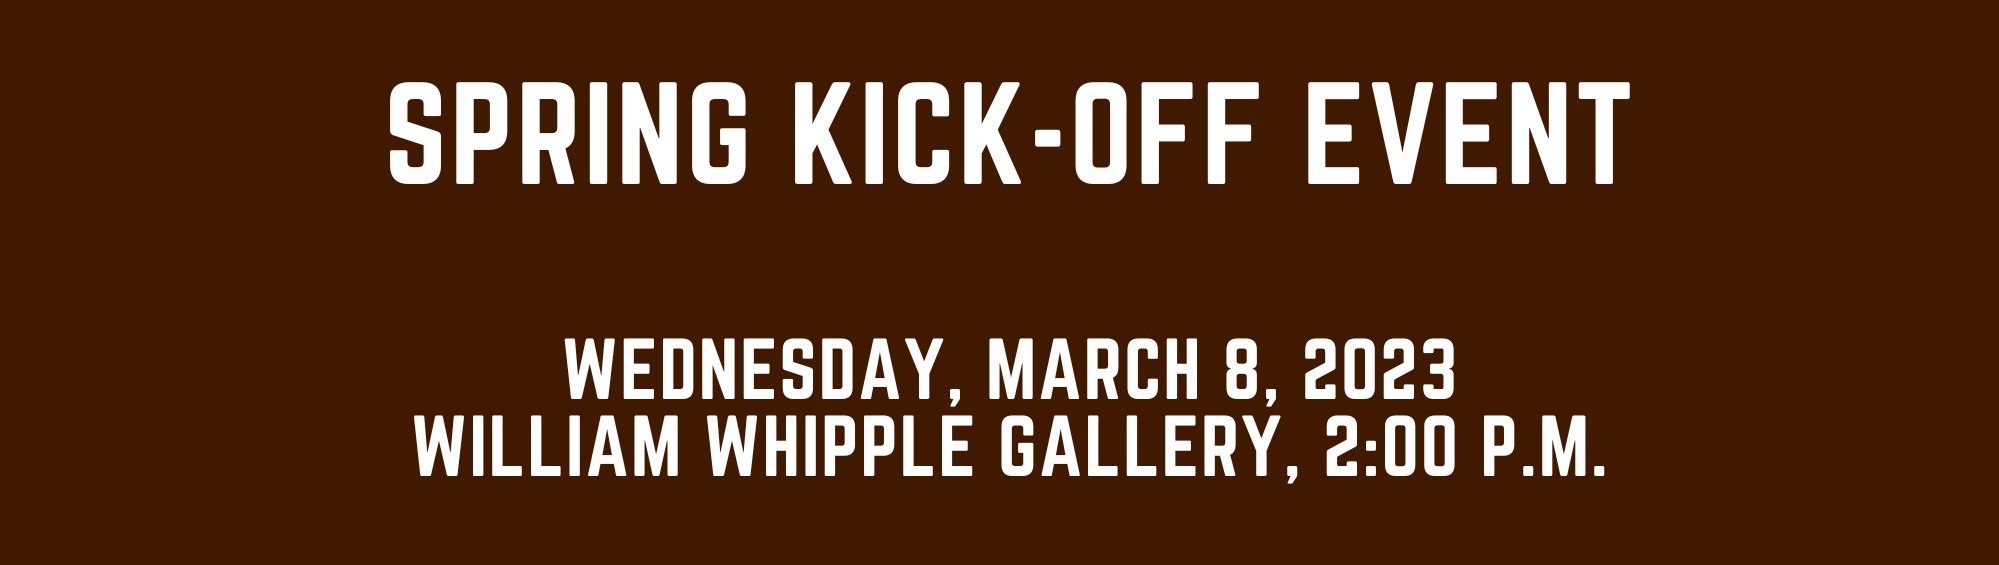 Spring Kick-Off Event - Wednesday, March 8, 2023 - William Whipple Gallery, 2pm